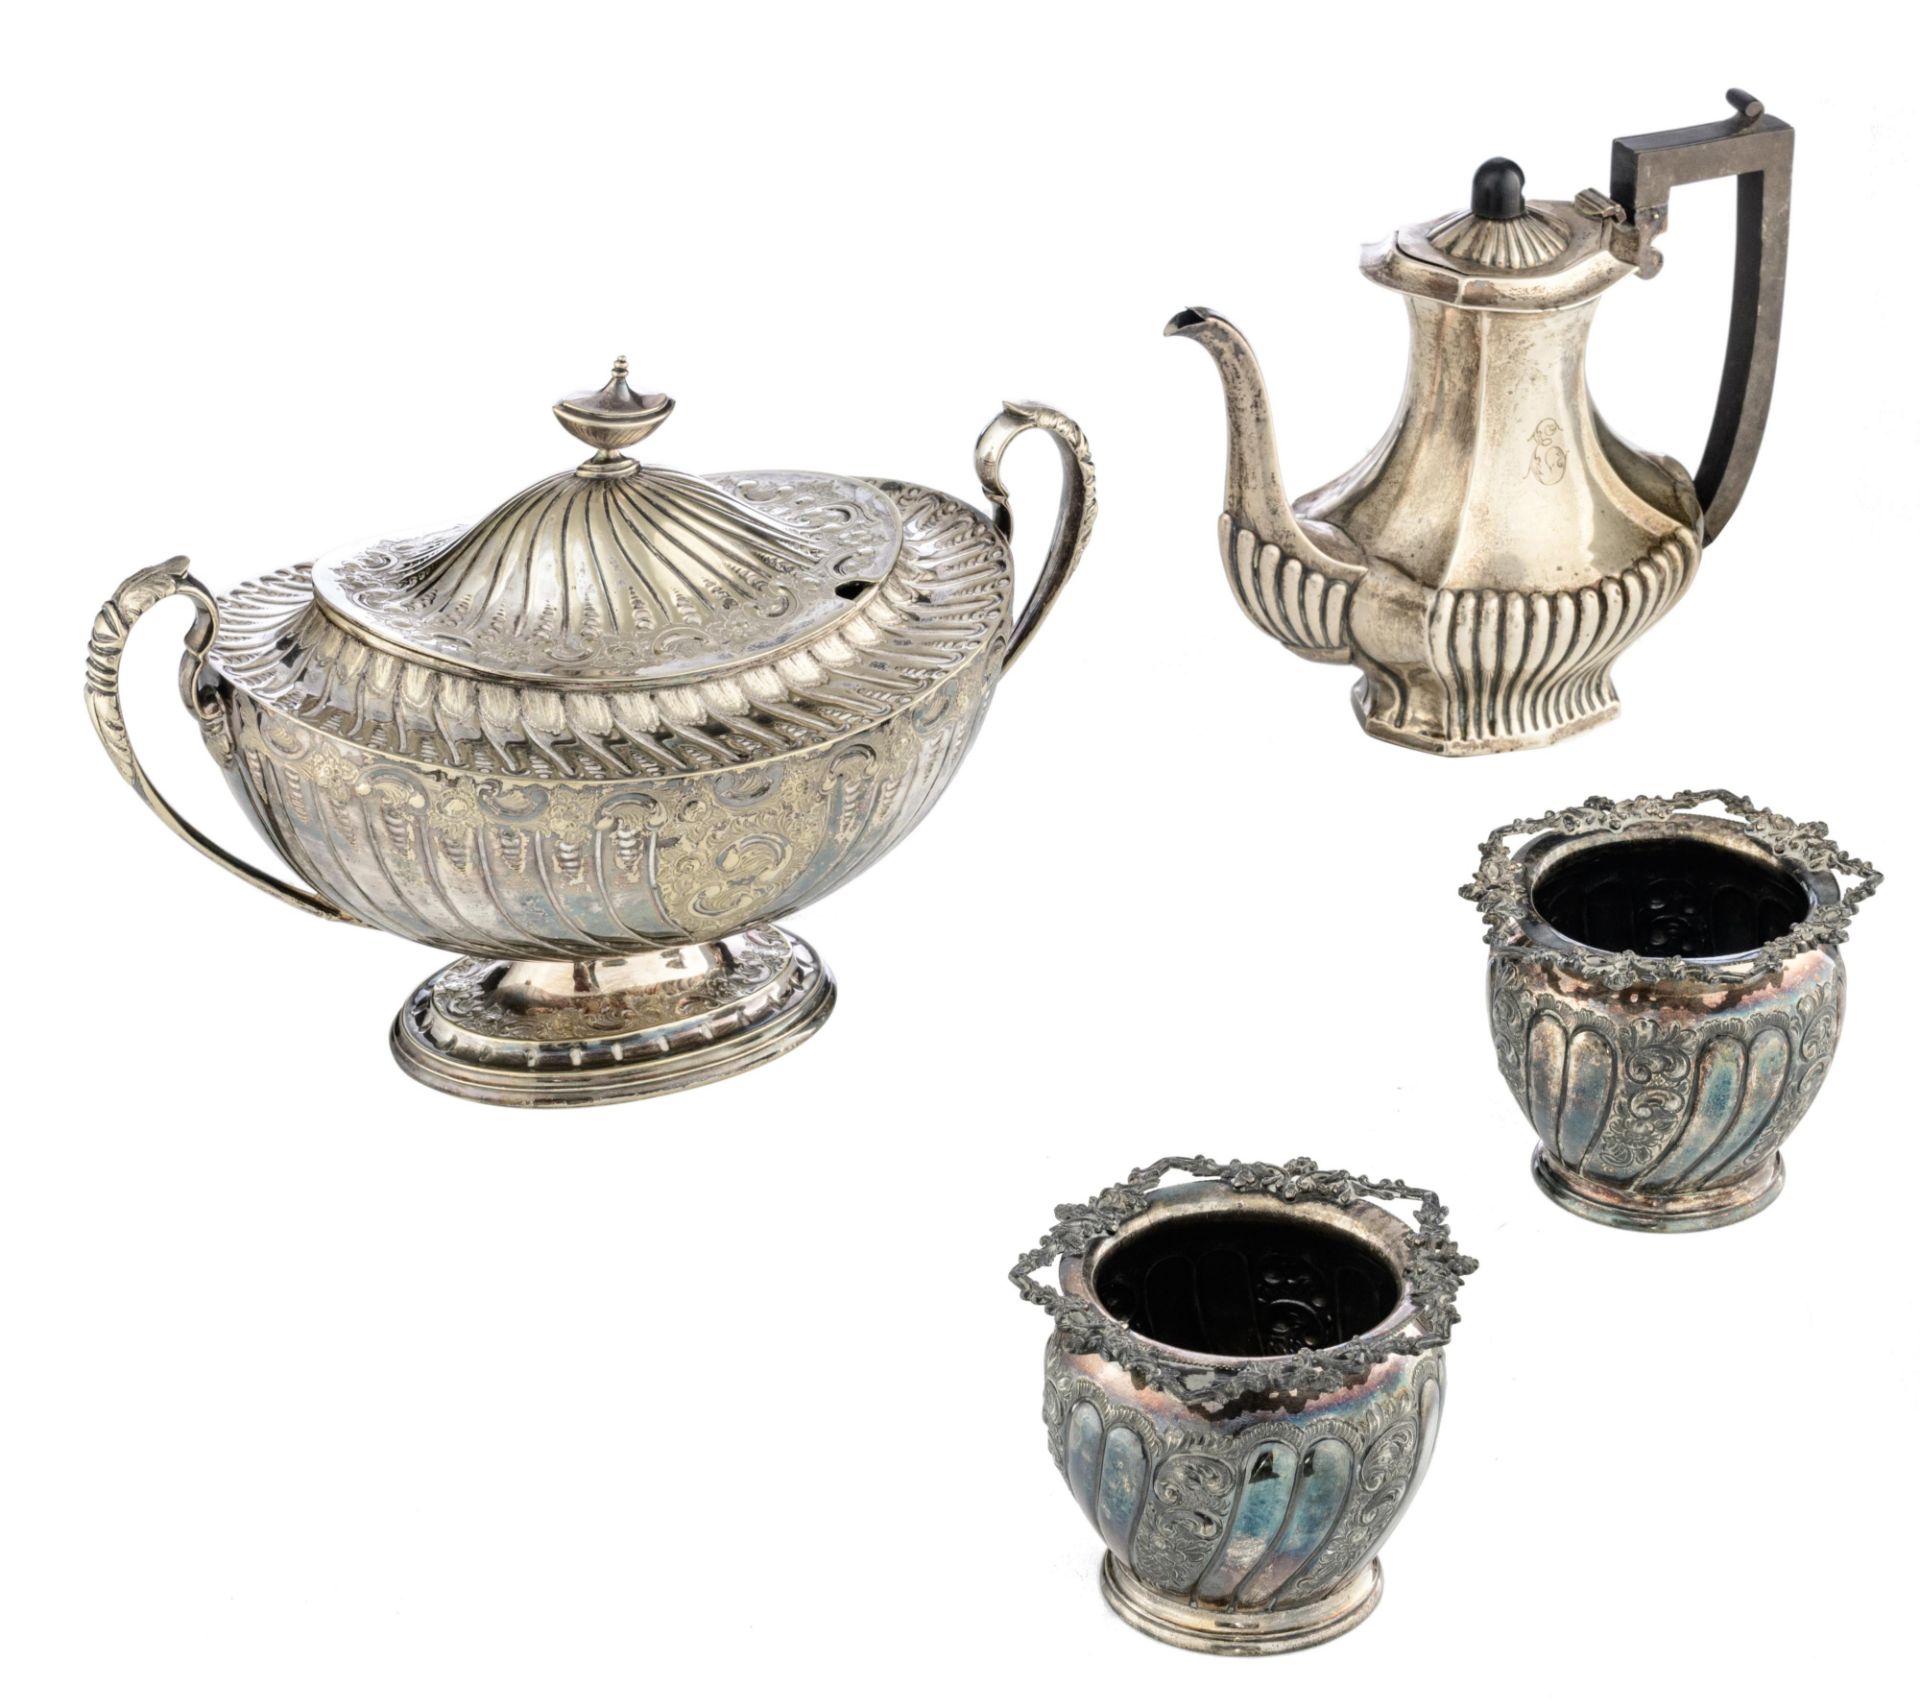 An English Neoclassical silver coffee pot with an ebony handle and knob, hallmarked Birmingham, date